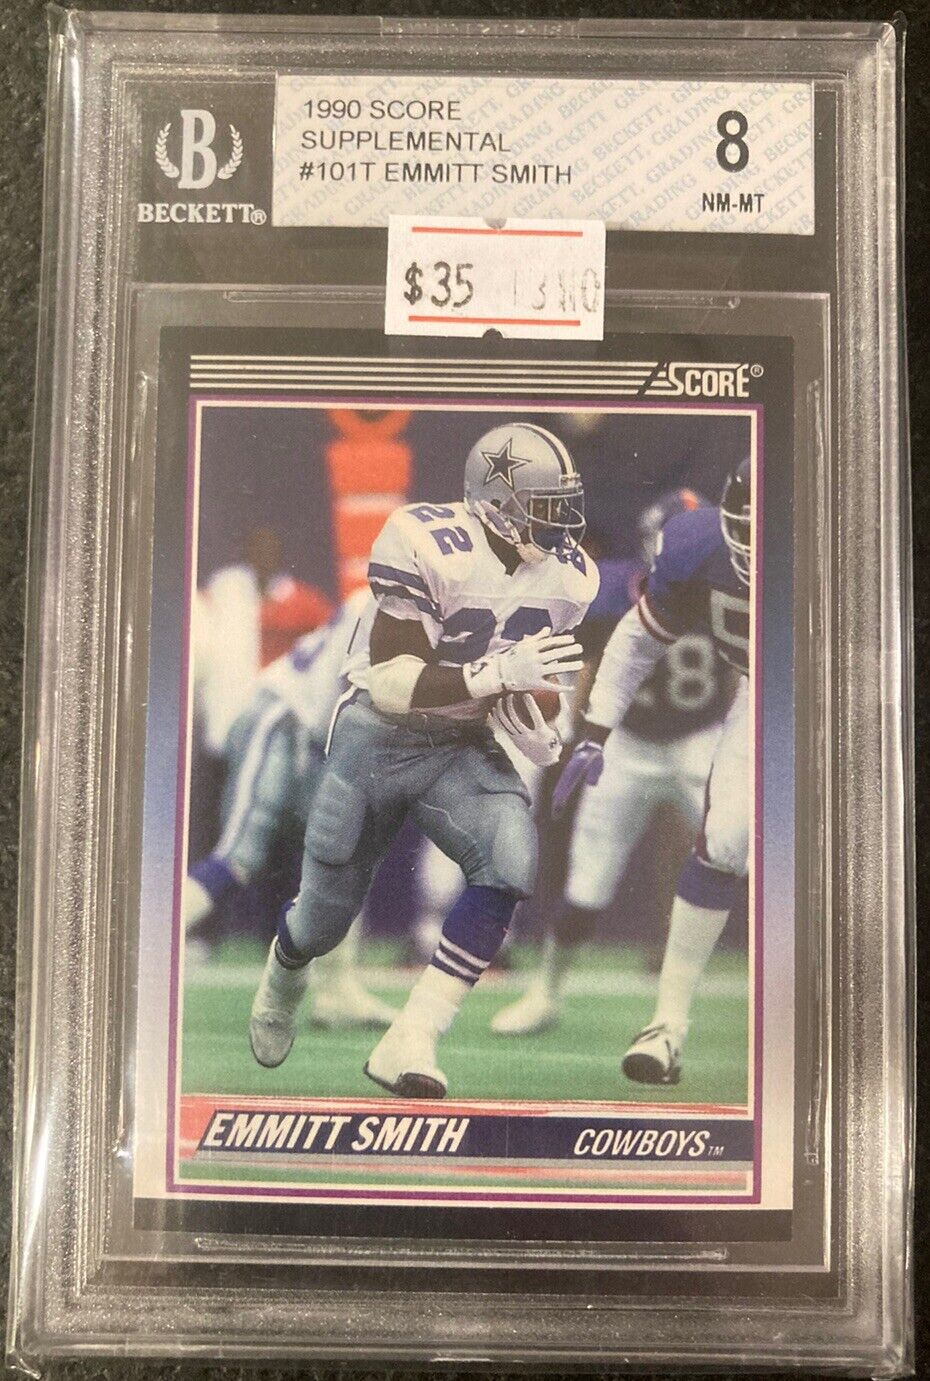 Emmitt Smith 1990 Score Supplemental #101T RC ROOKIE BGS 8 w/ 9.5 9 Subs